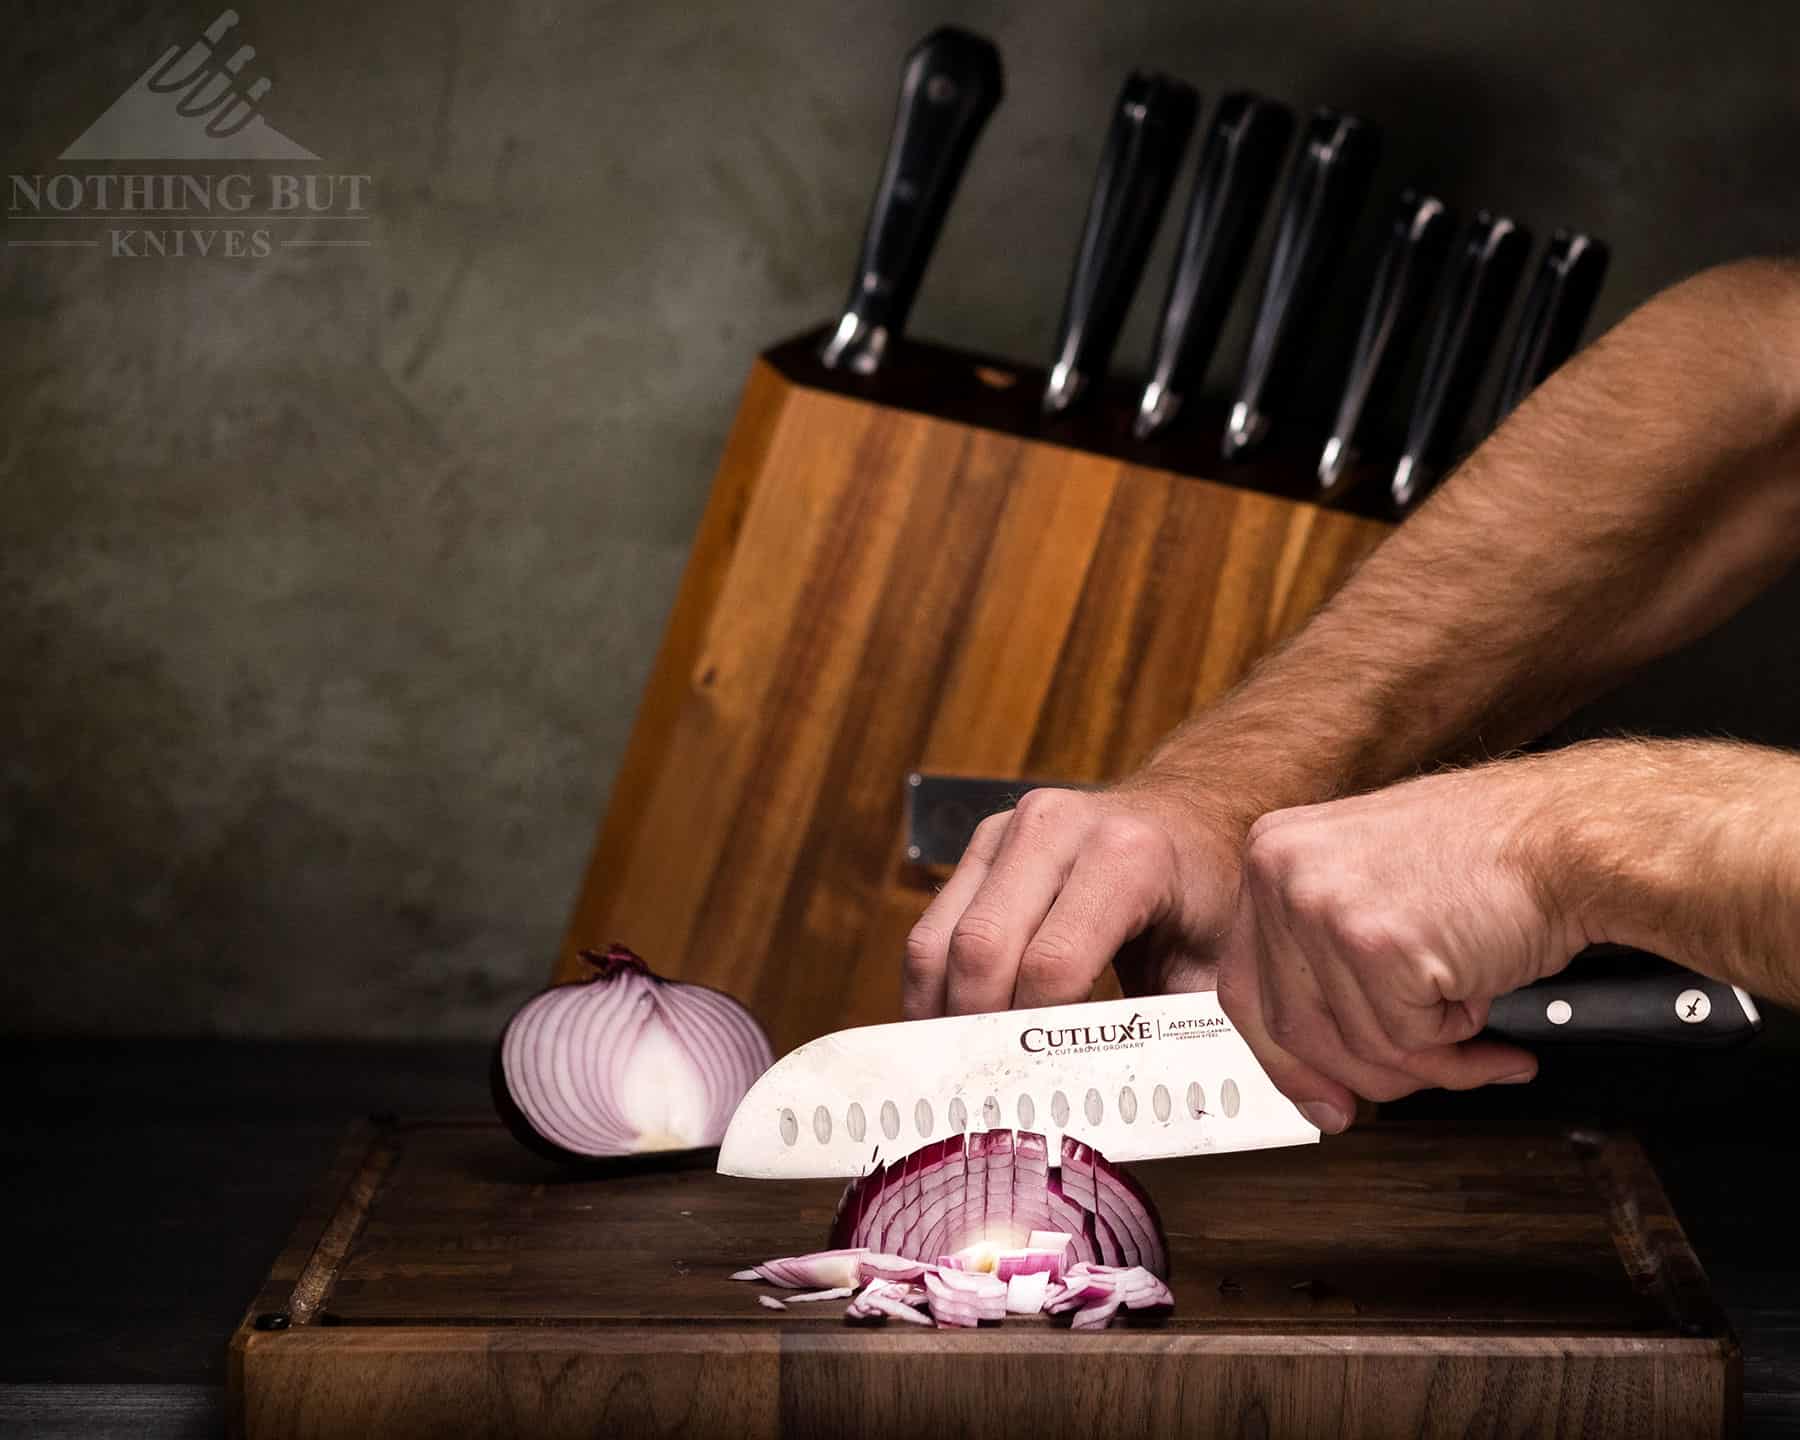 The Santoku knife is one of the standout performers in the Cutluxe Artisan series knife set. 